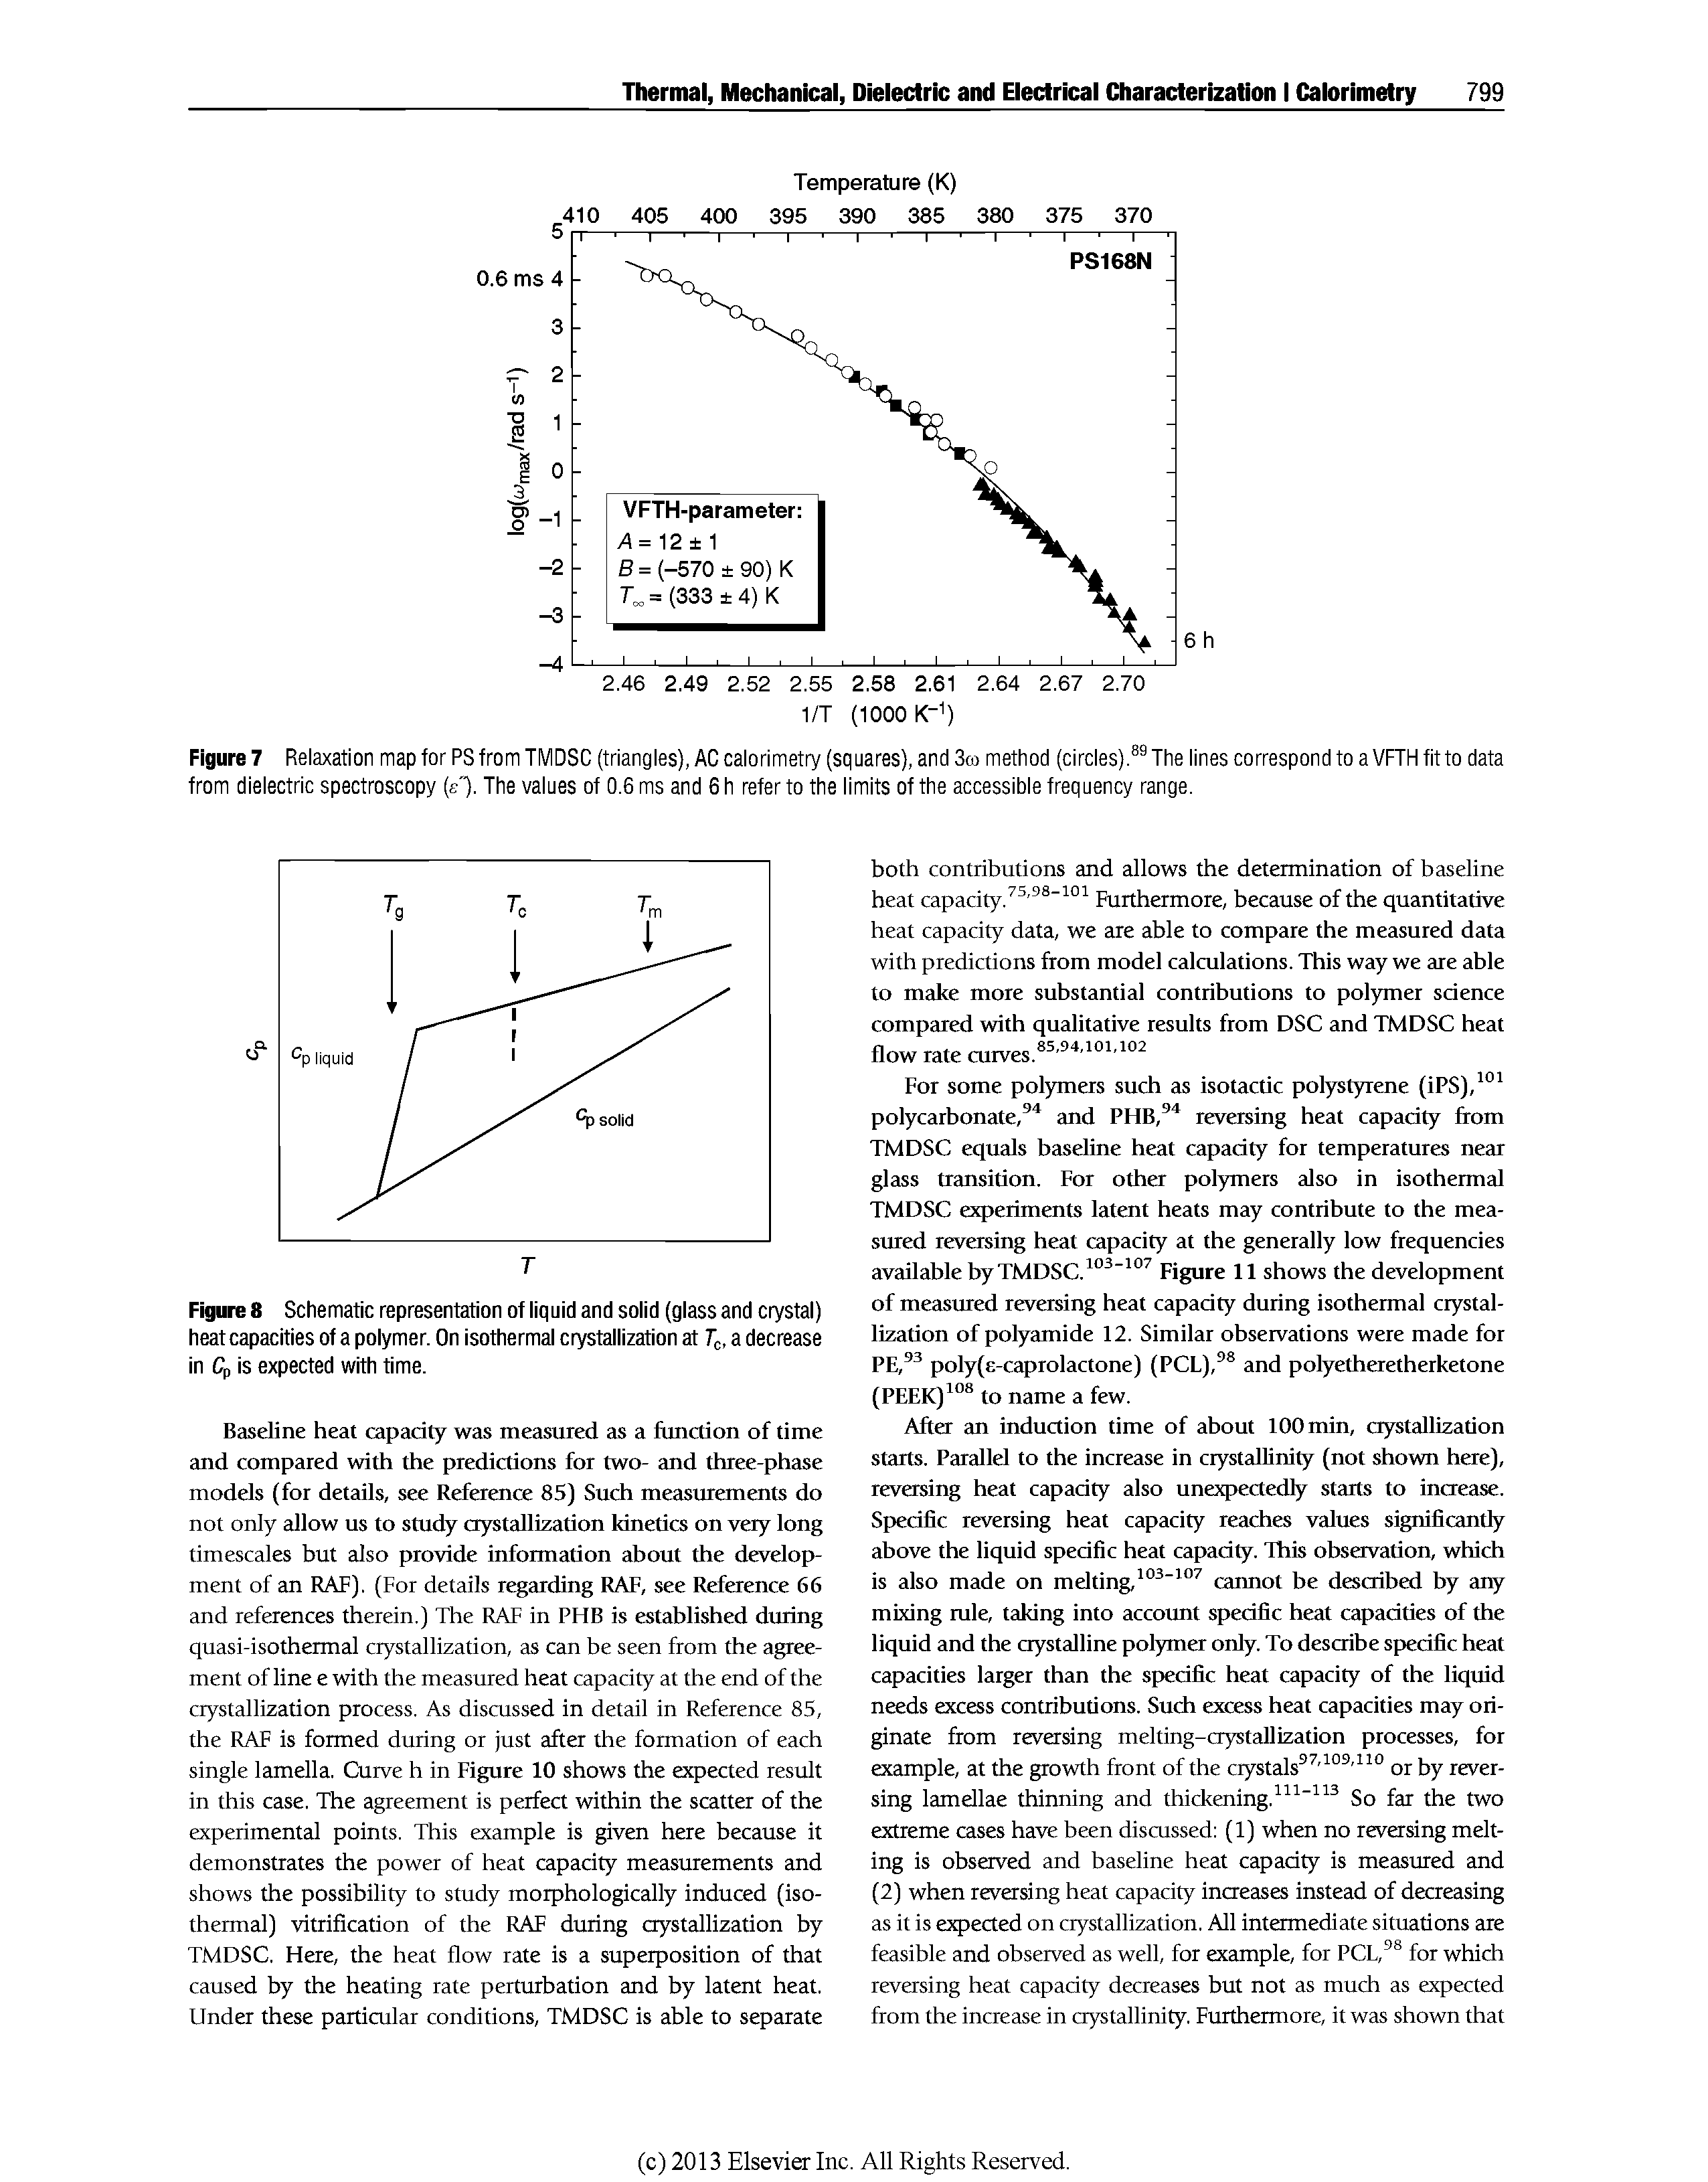 Figure 8 Schematic representation of liquid and solid (glass and crystal) heat capacities of a polymer. On isothermal crystallization at T. a decrease in Cf, is expected with time.